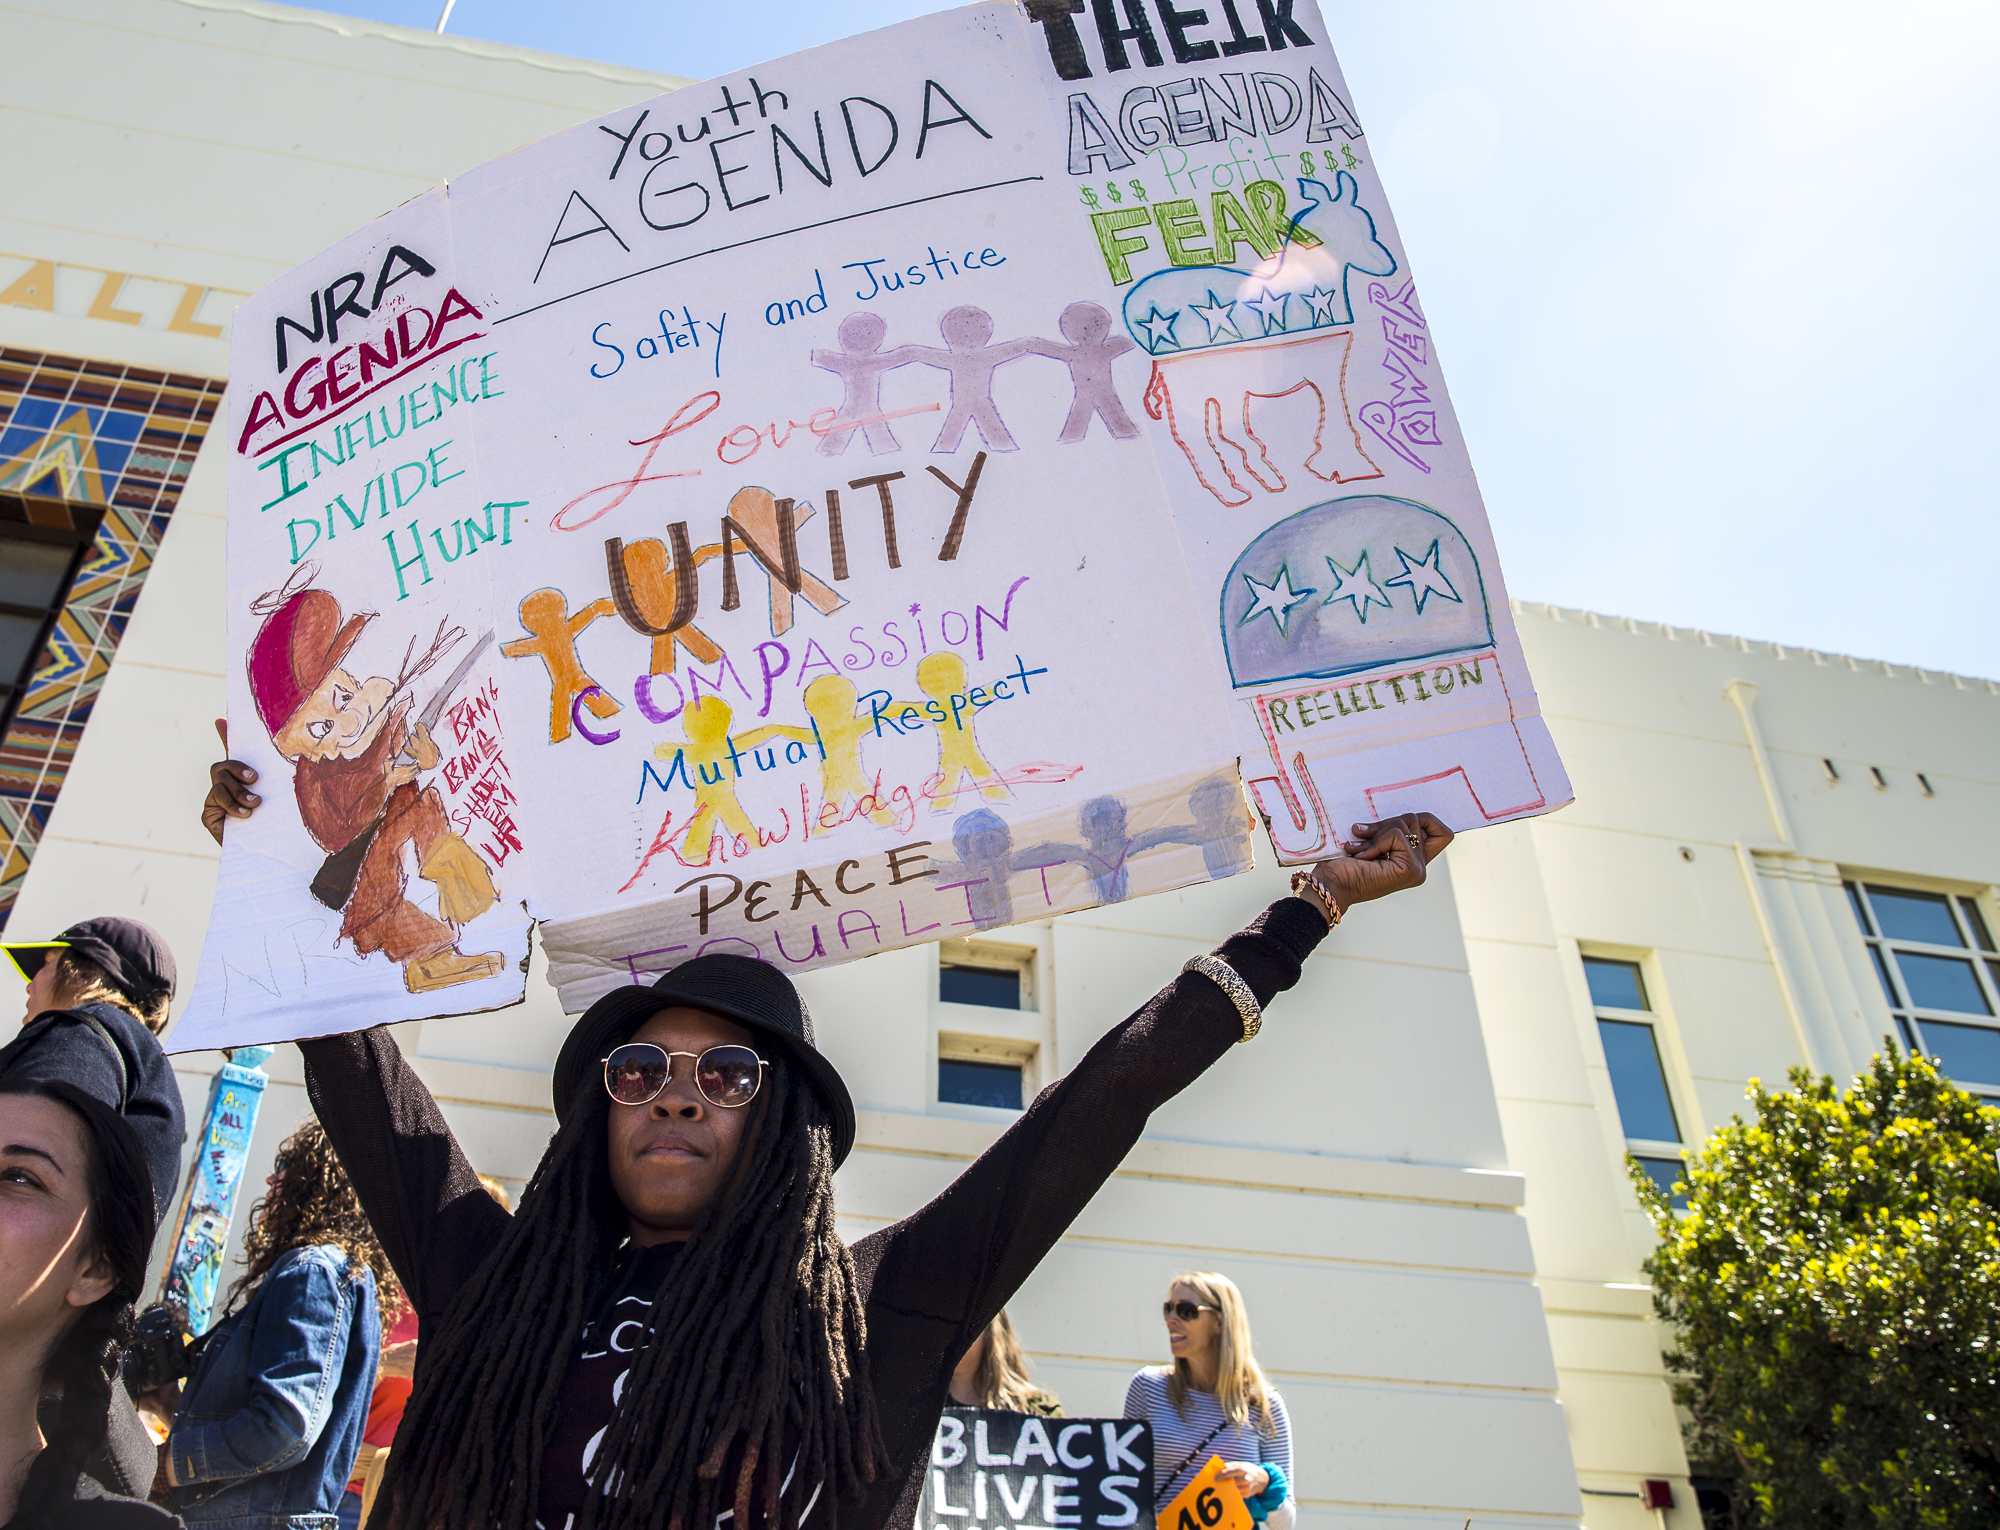  Felecia Lenee, better known as “Fe Love” to her fans, holds up a sign that describes unity, respect, and love during the Santa Monica student walkout where students of neighboring high schools and middle schools converged at Santa Monica City Hall i